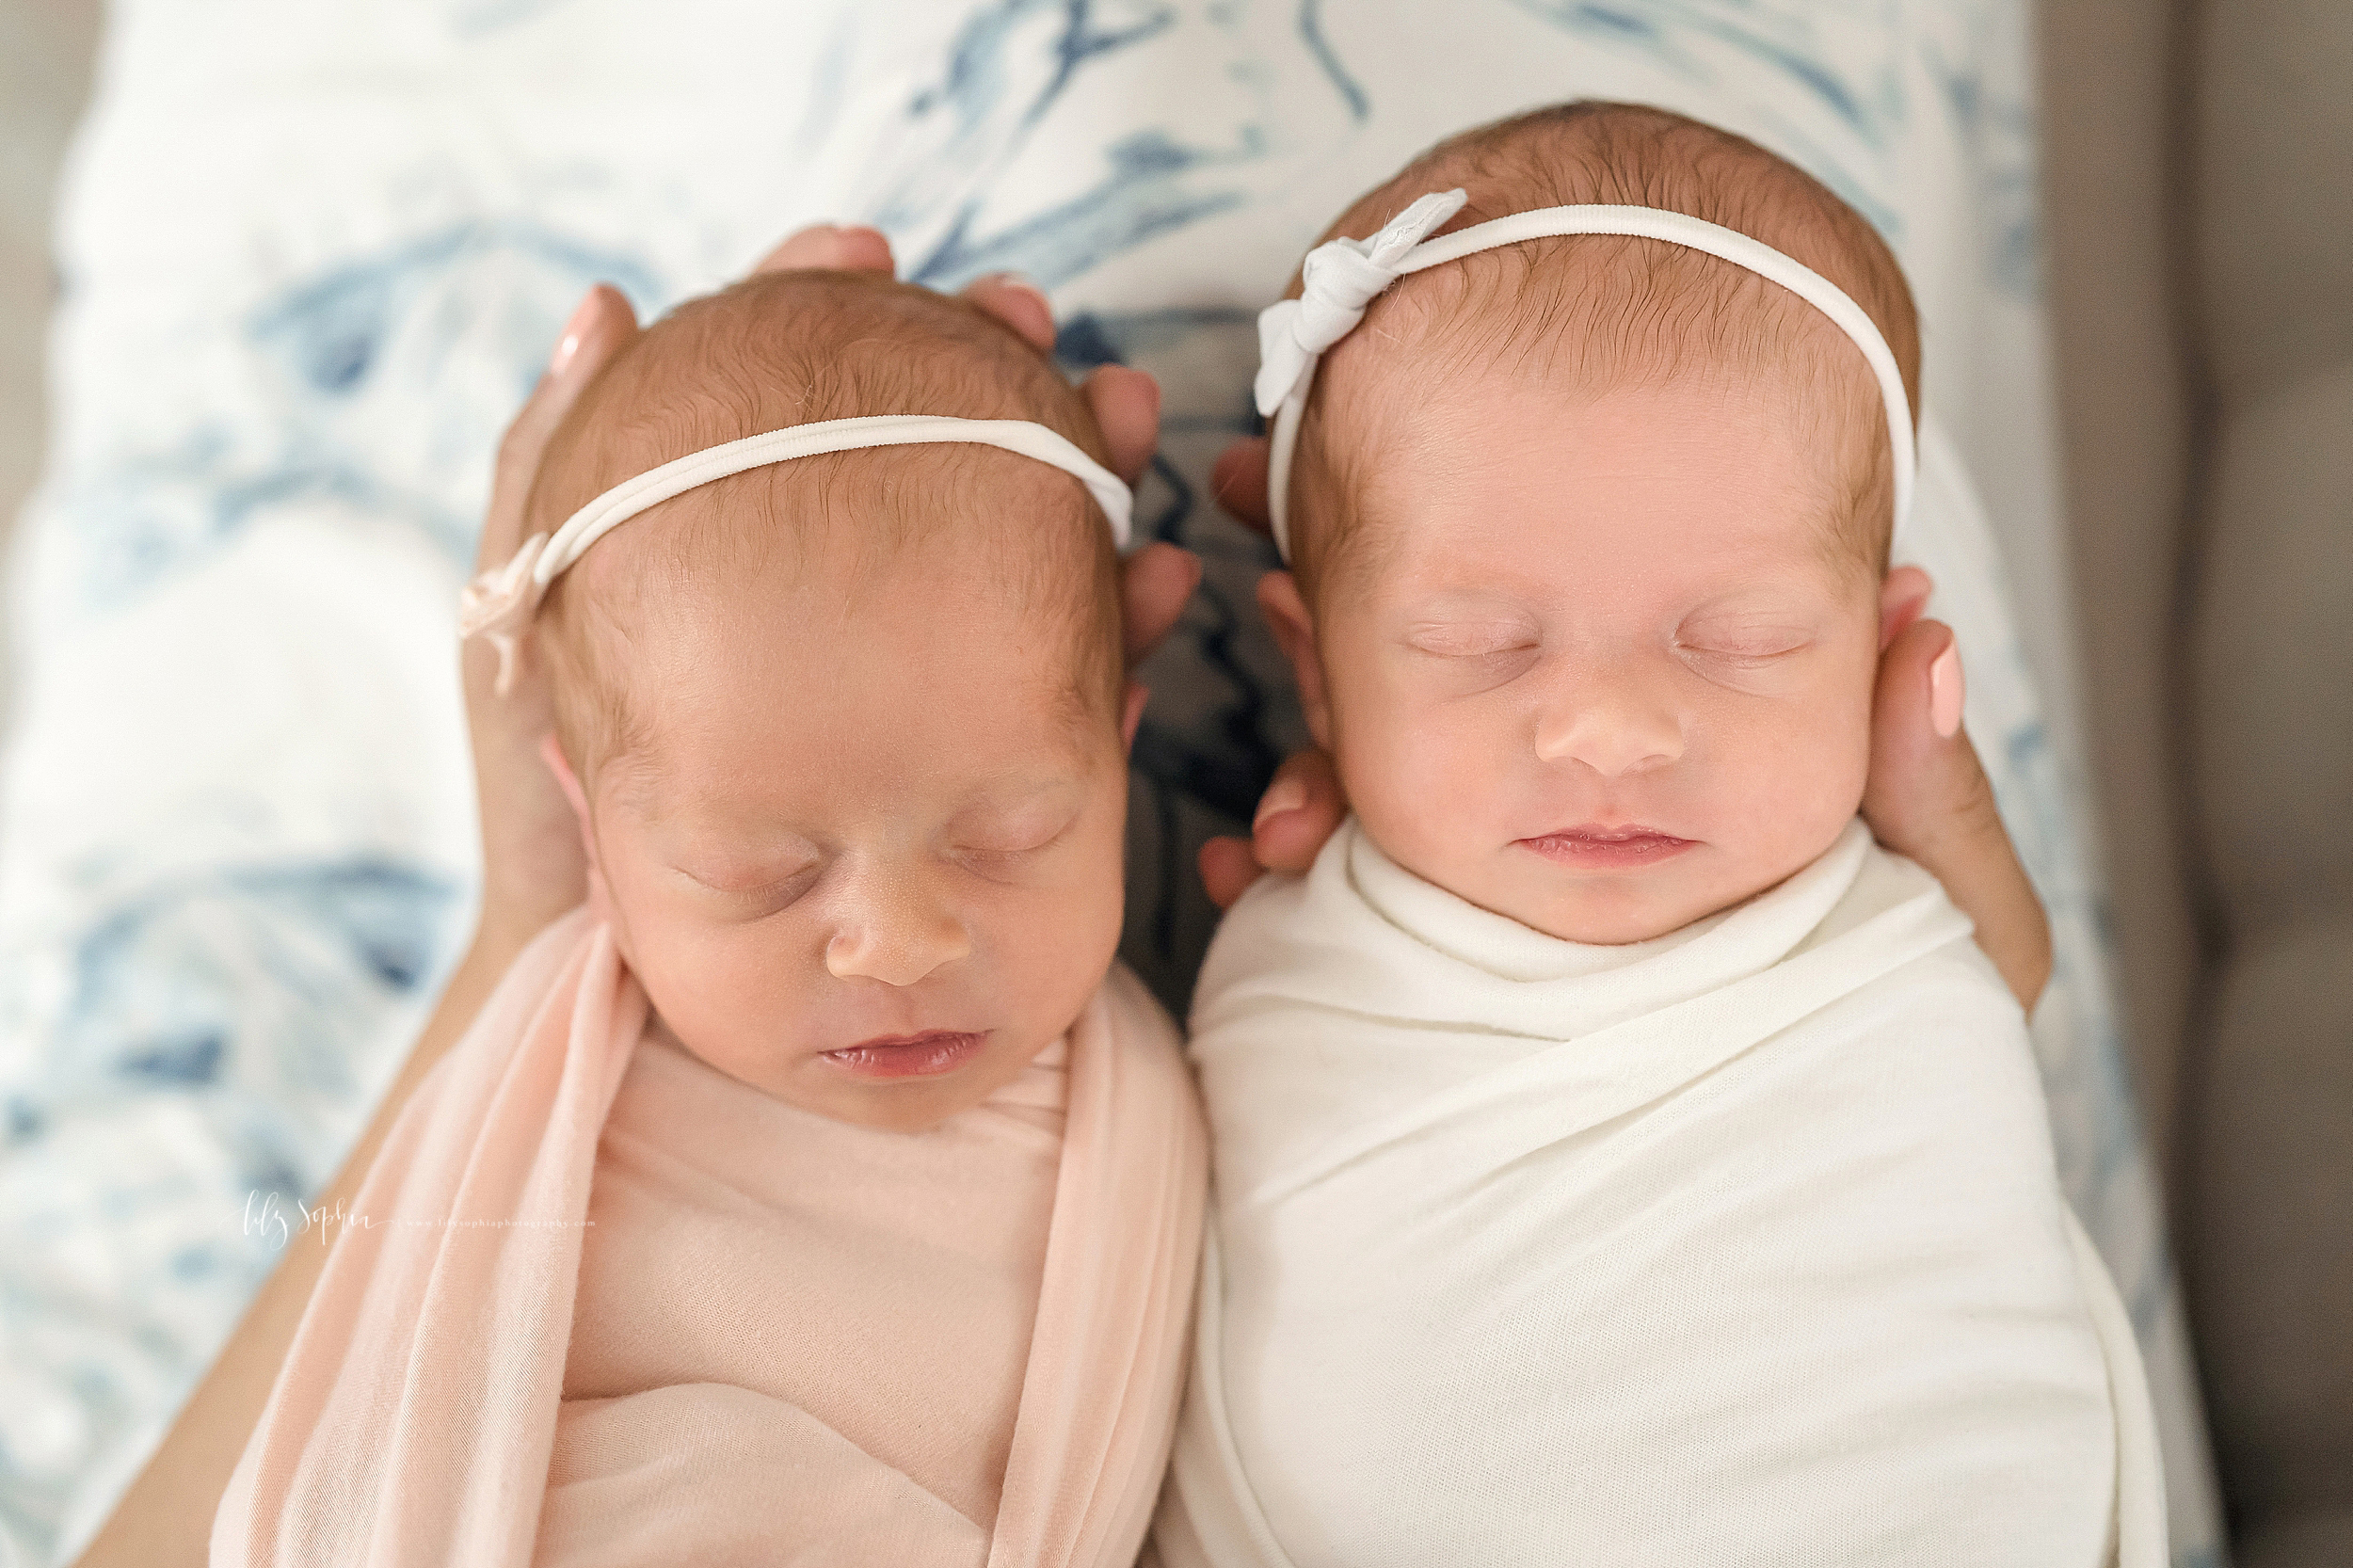 atlanta-decatur-candler-park-sandy-springs-buckhead-virginia-highlands-west-end-decatur-lily-sophia-photography-identical-twin-baby-newborn-girls-toddler-big-brother-family-photos_2059.jpg